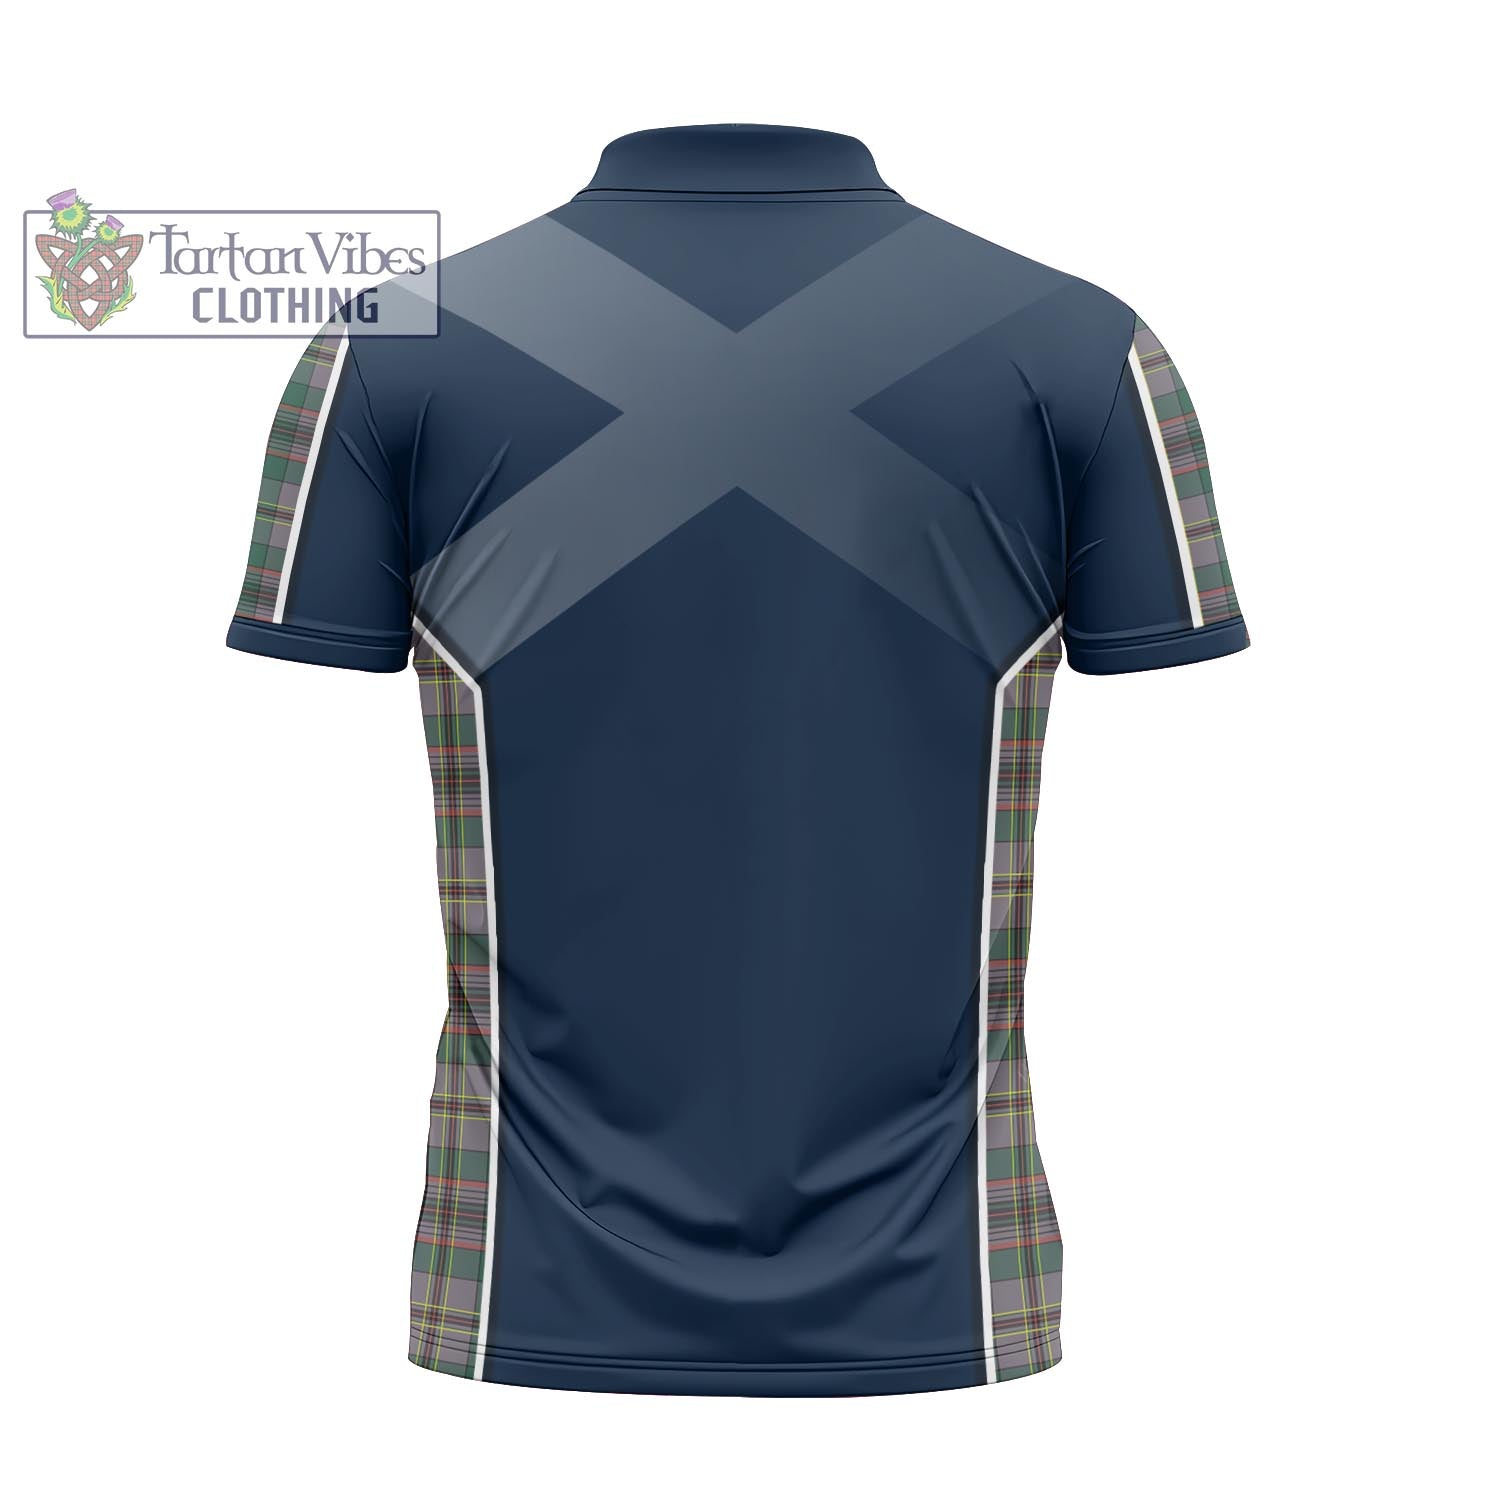 Tartan Vibes Clothing Craig Ancient Tartan Zipper Polo Shirt with Family Crest and Lion Rampant Vibes Sport Style